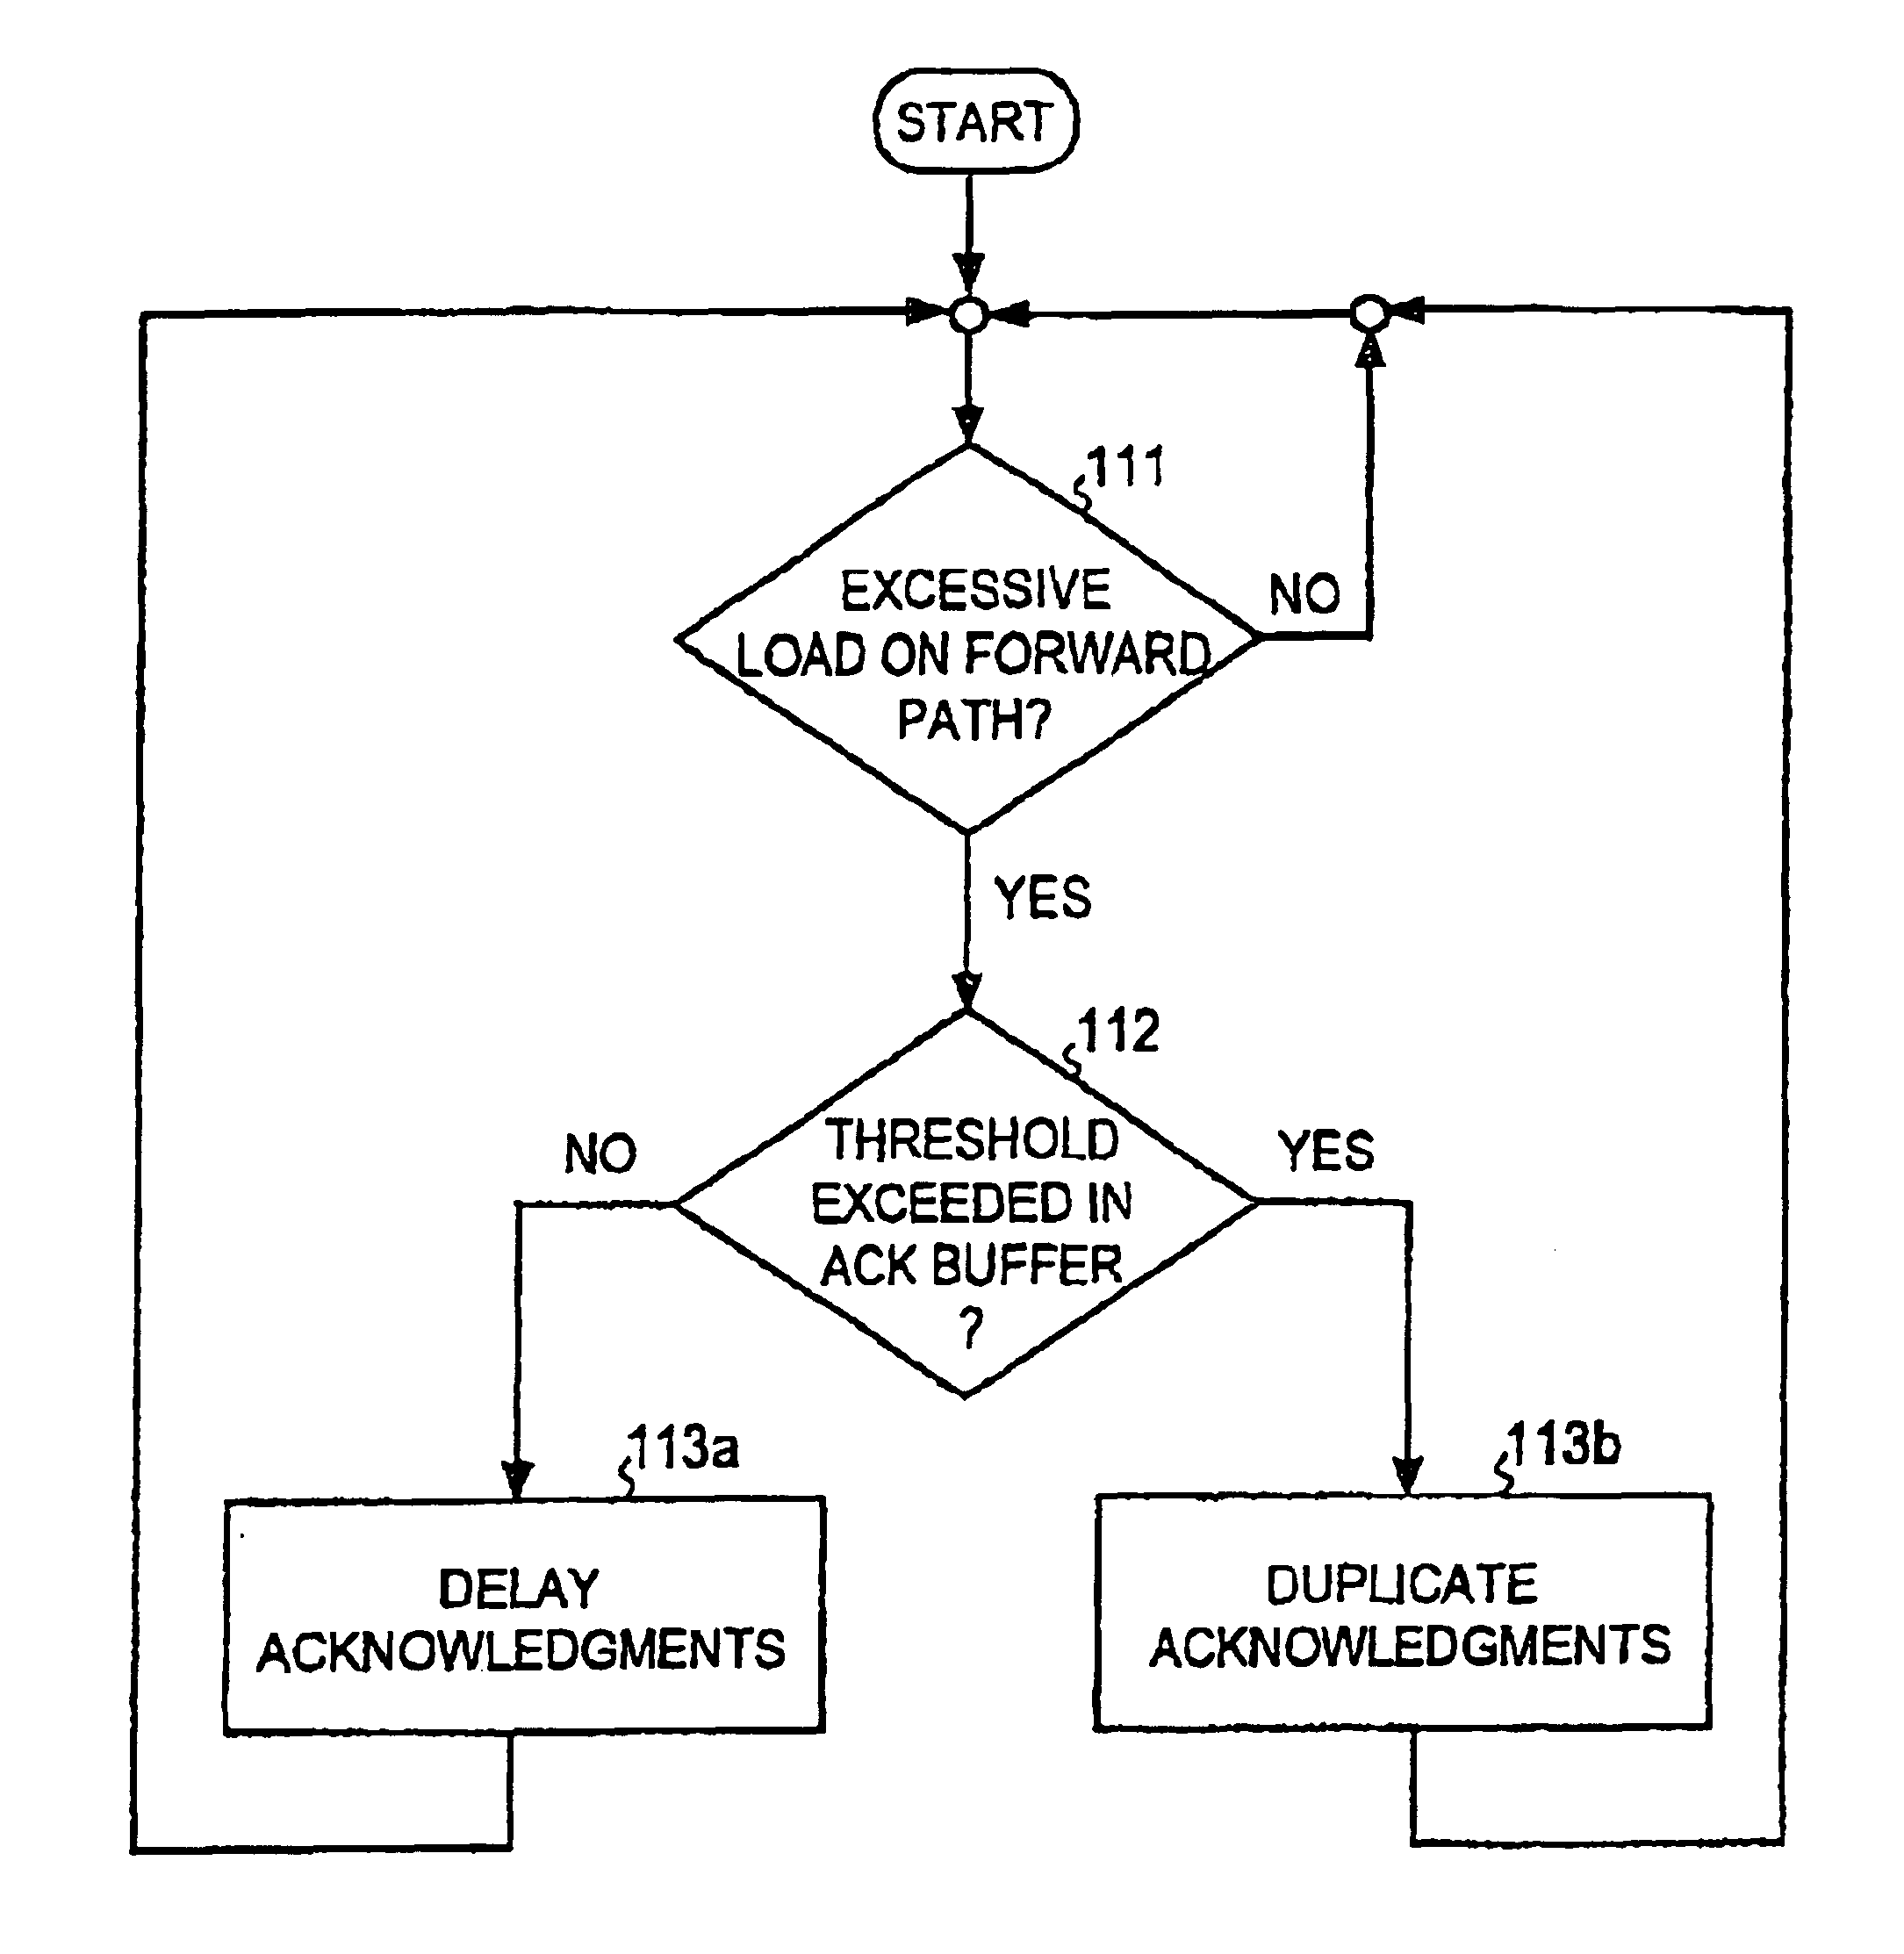 Congestion and overload control in a packet switched network